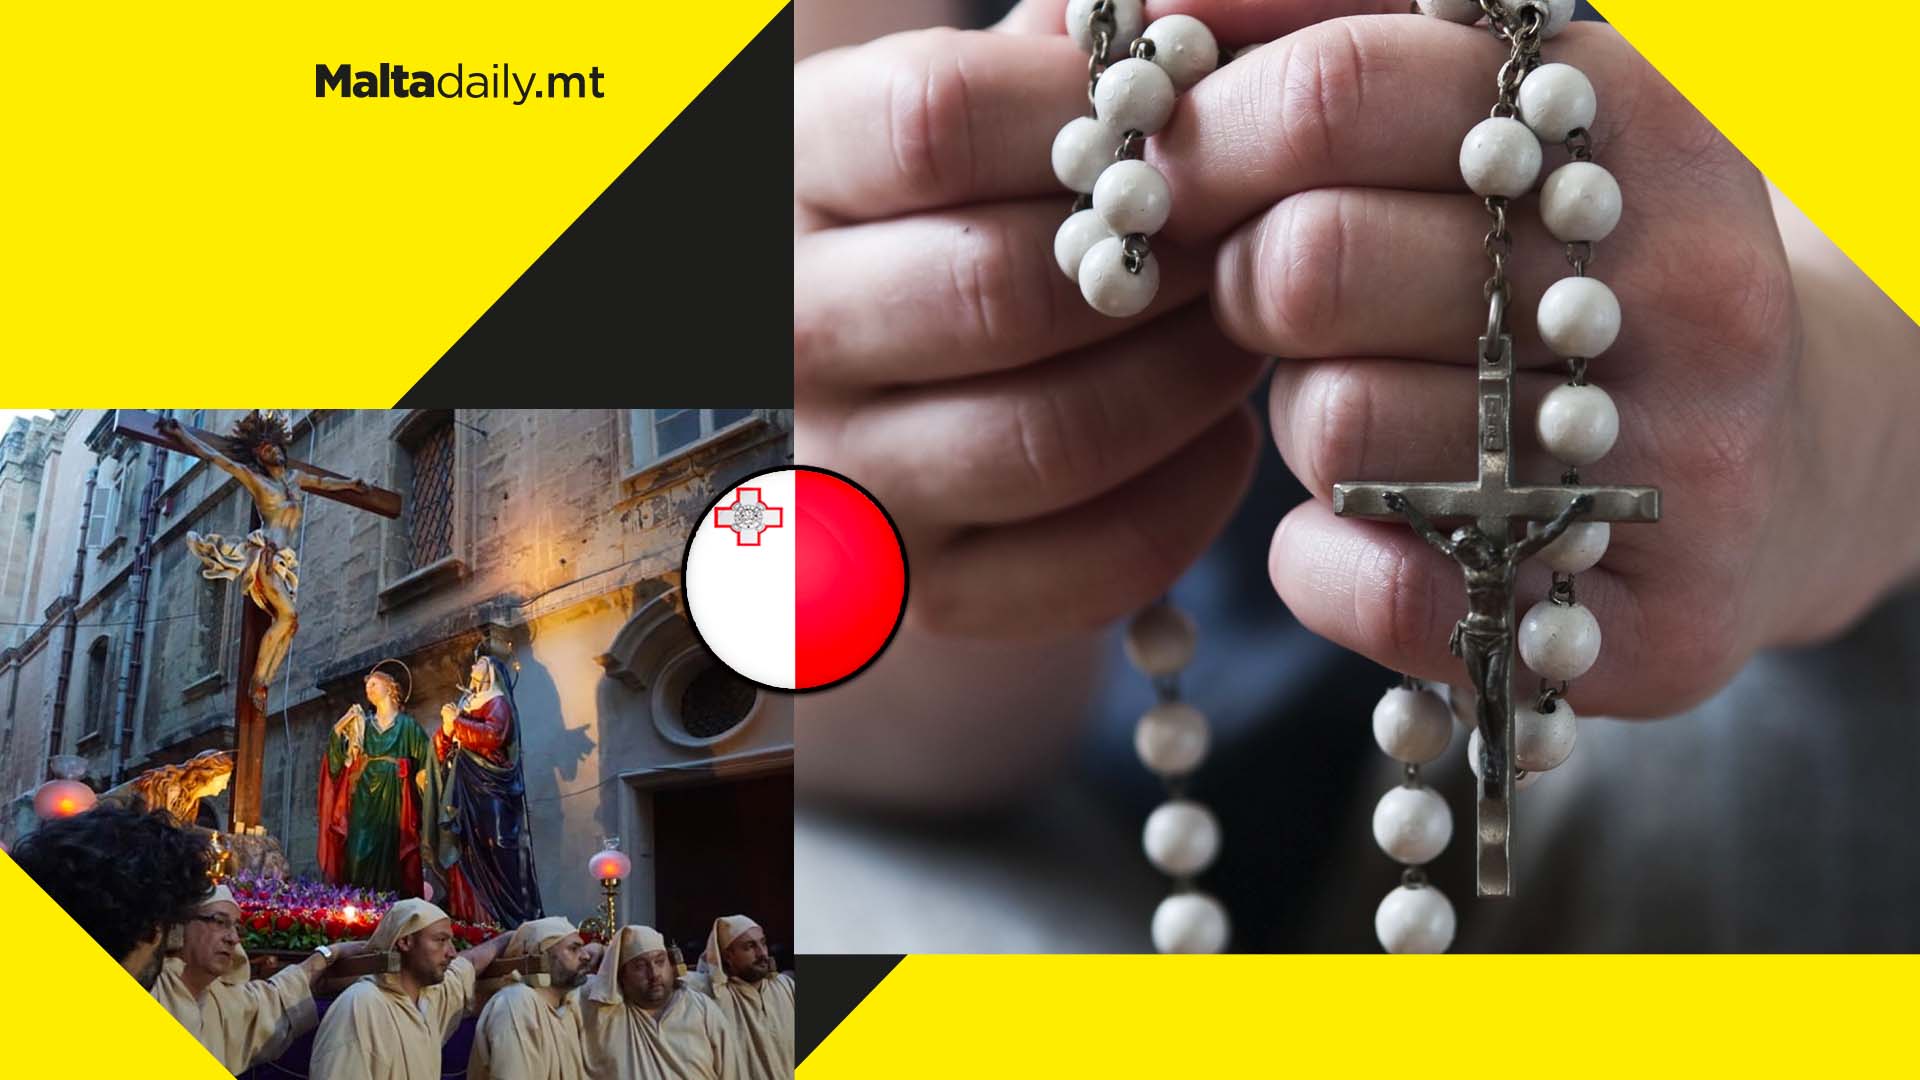 Malta ranks as fifth most religious country in Europe